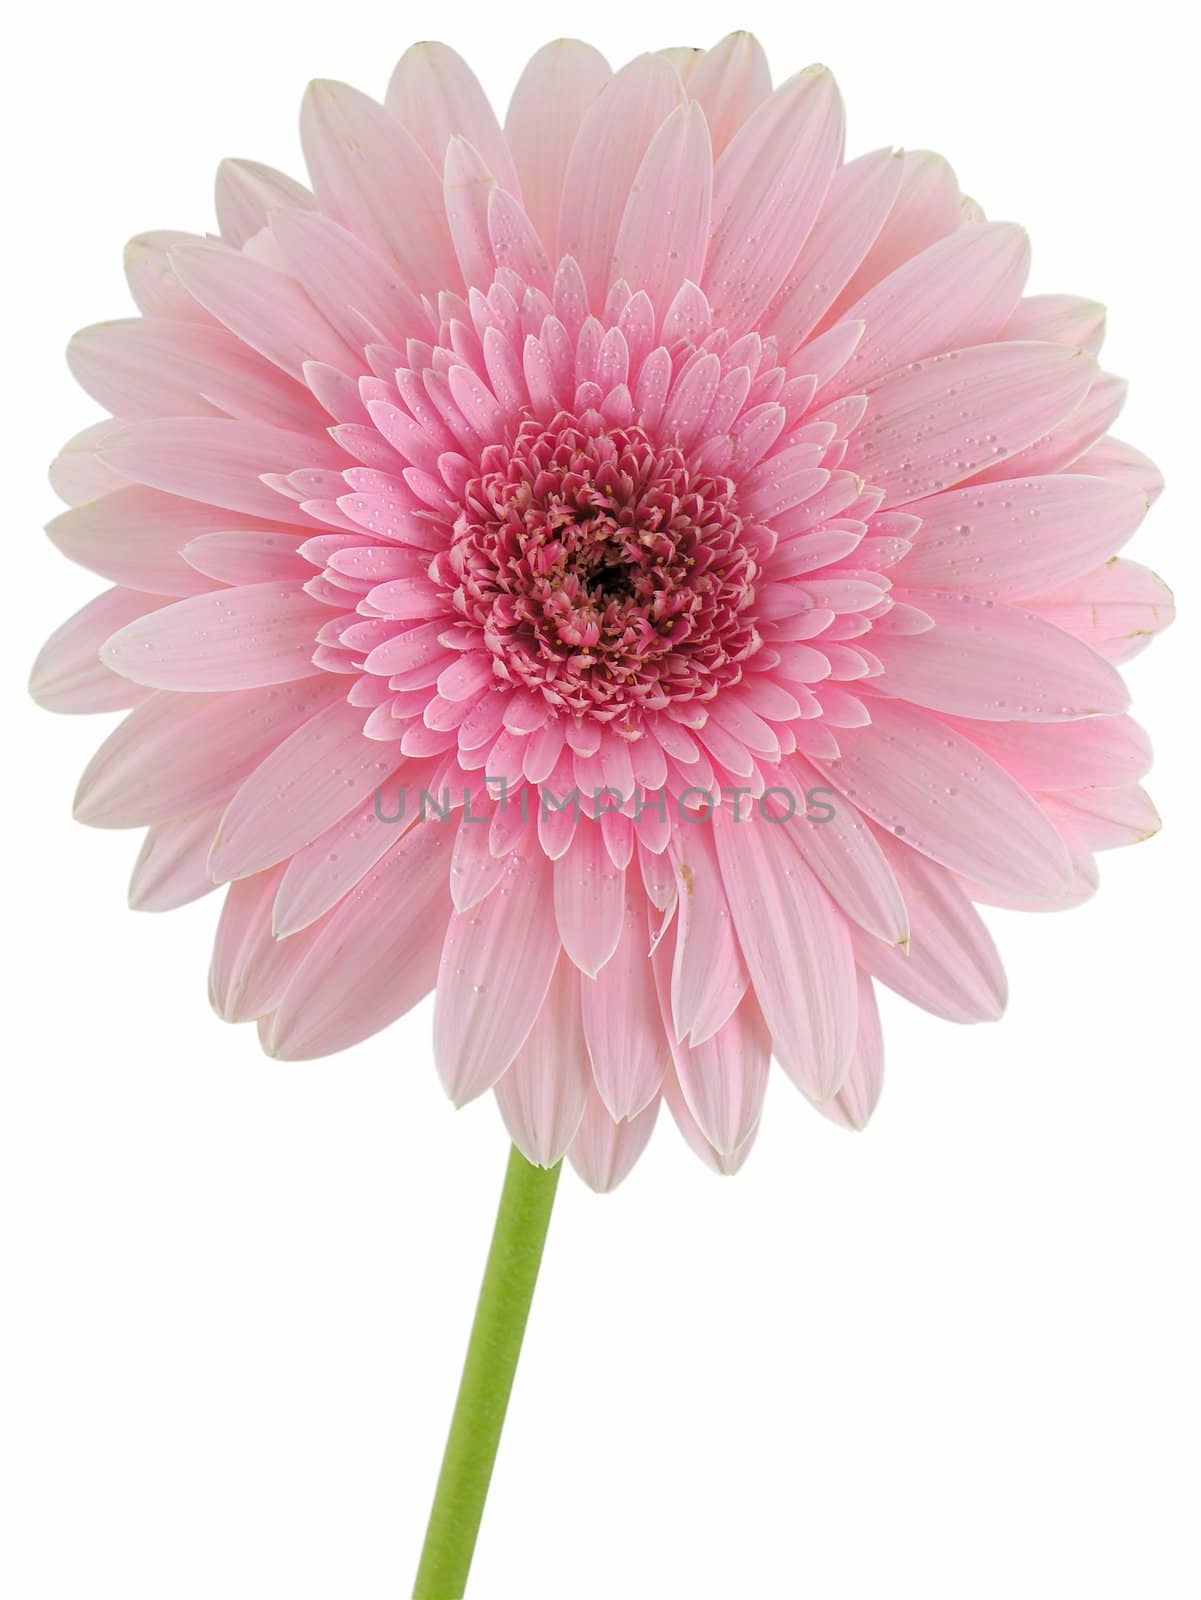 Pink gerbera daisy isolated on a white background